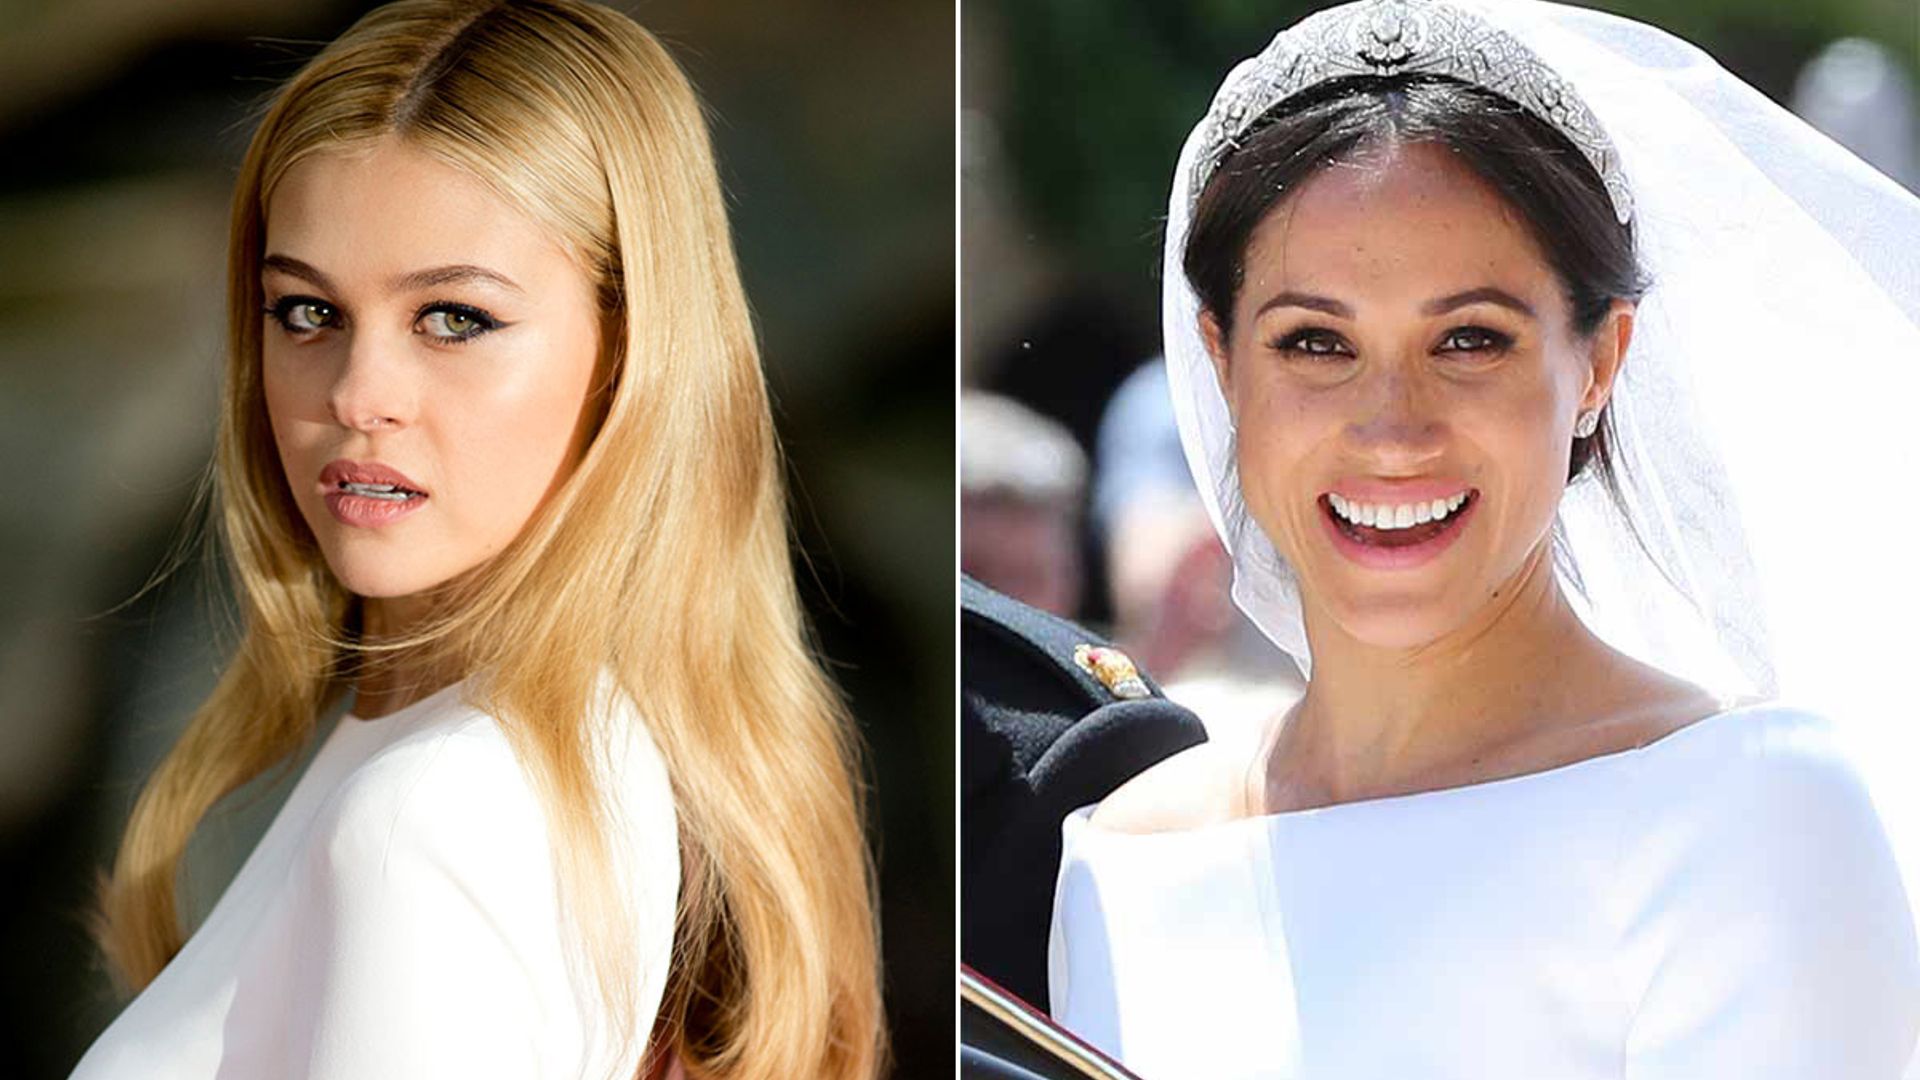 Meghan Markle lookalikes are the new stars of bridal campaigns